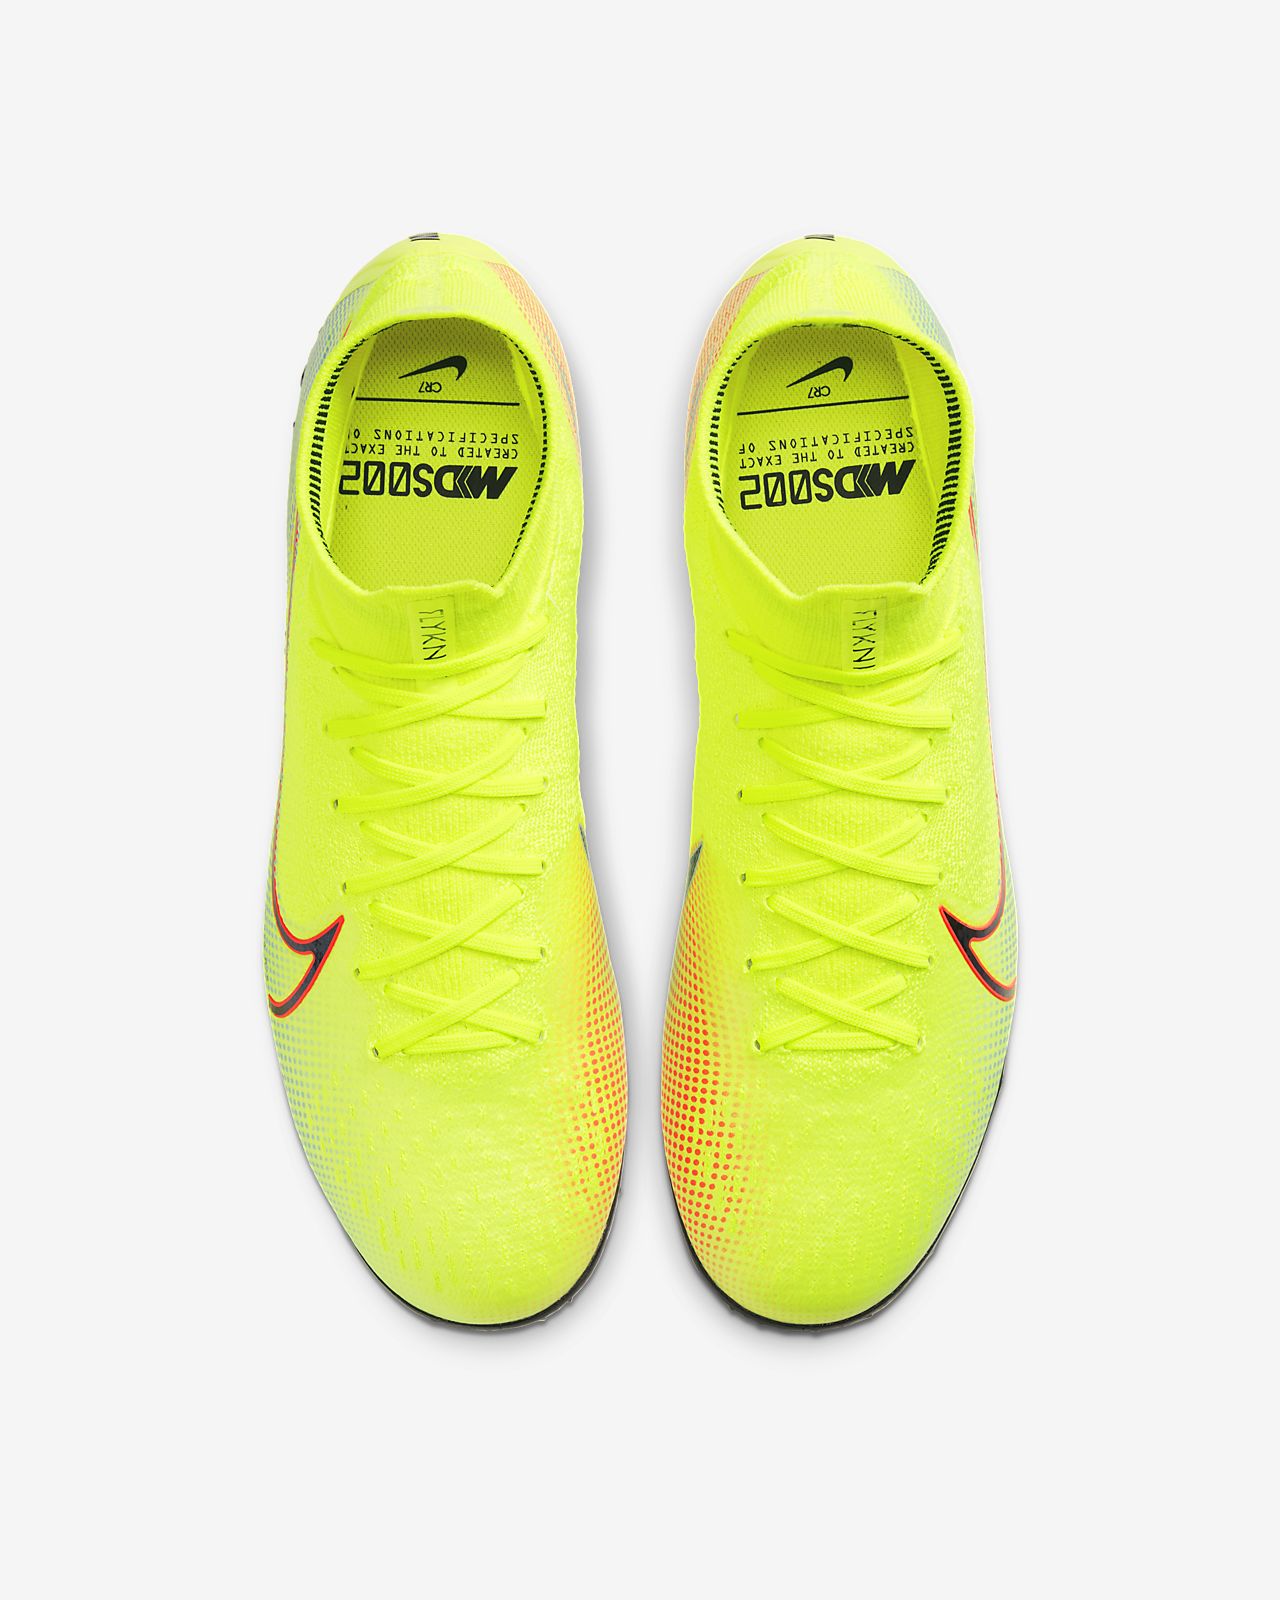 Nike Mercurial Superflyx 6 Academy TF White cheap superfly